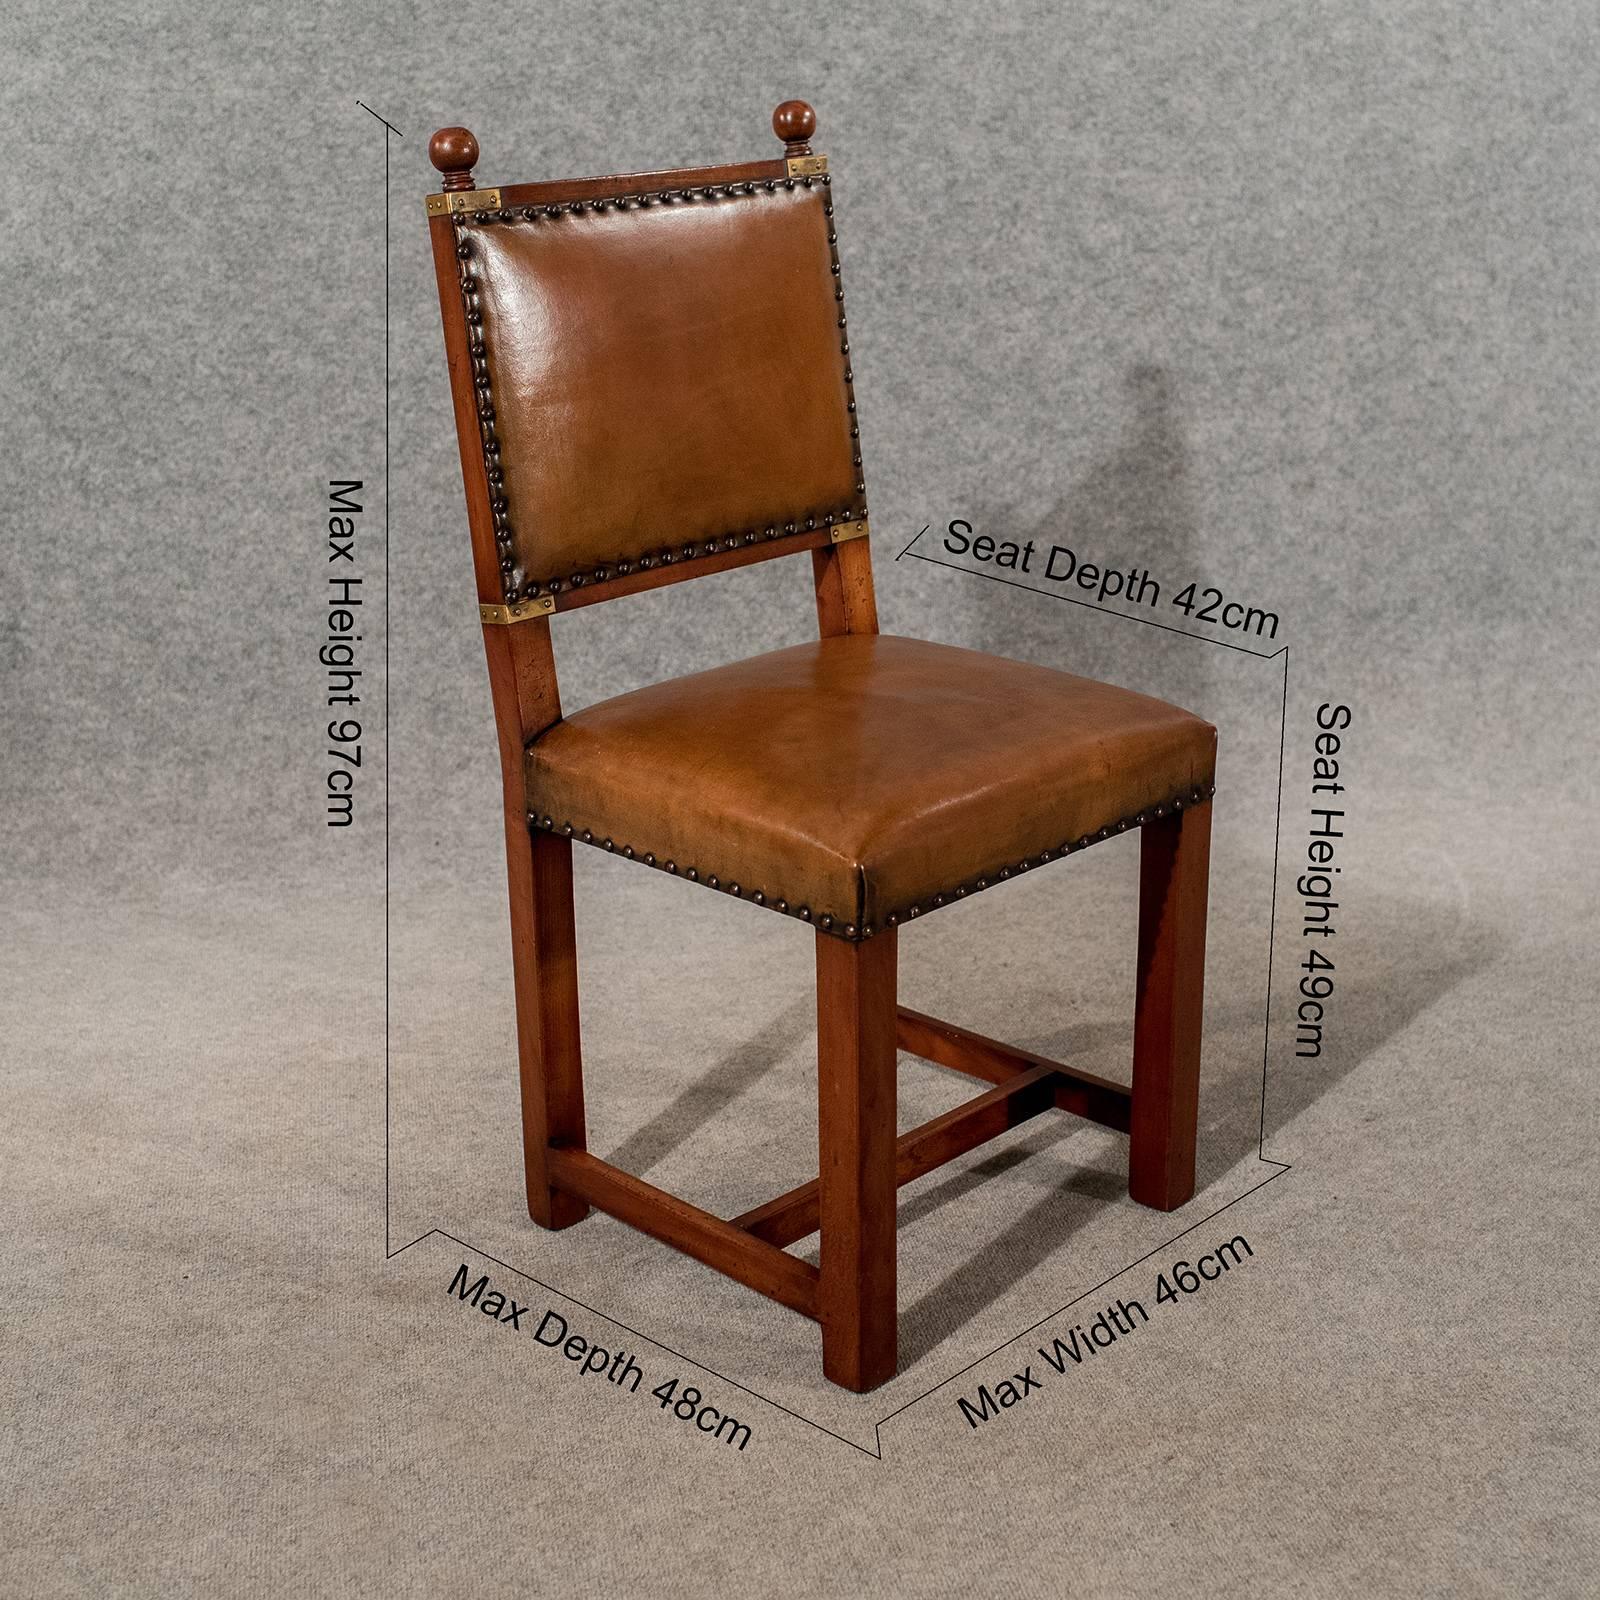 A practical and attractive set of four kitchen or dining chairs presented in very good antique condition
In sturdy oak with a very desirable tone
Dating from the mid-20th century
Rising from a square leg set united by H-lower stretcher
Offering